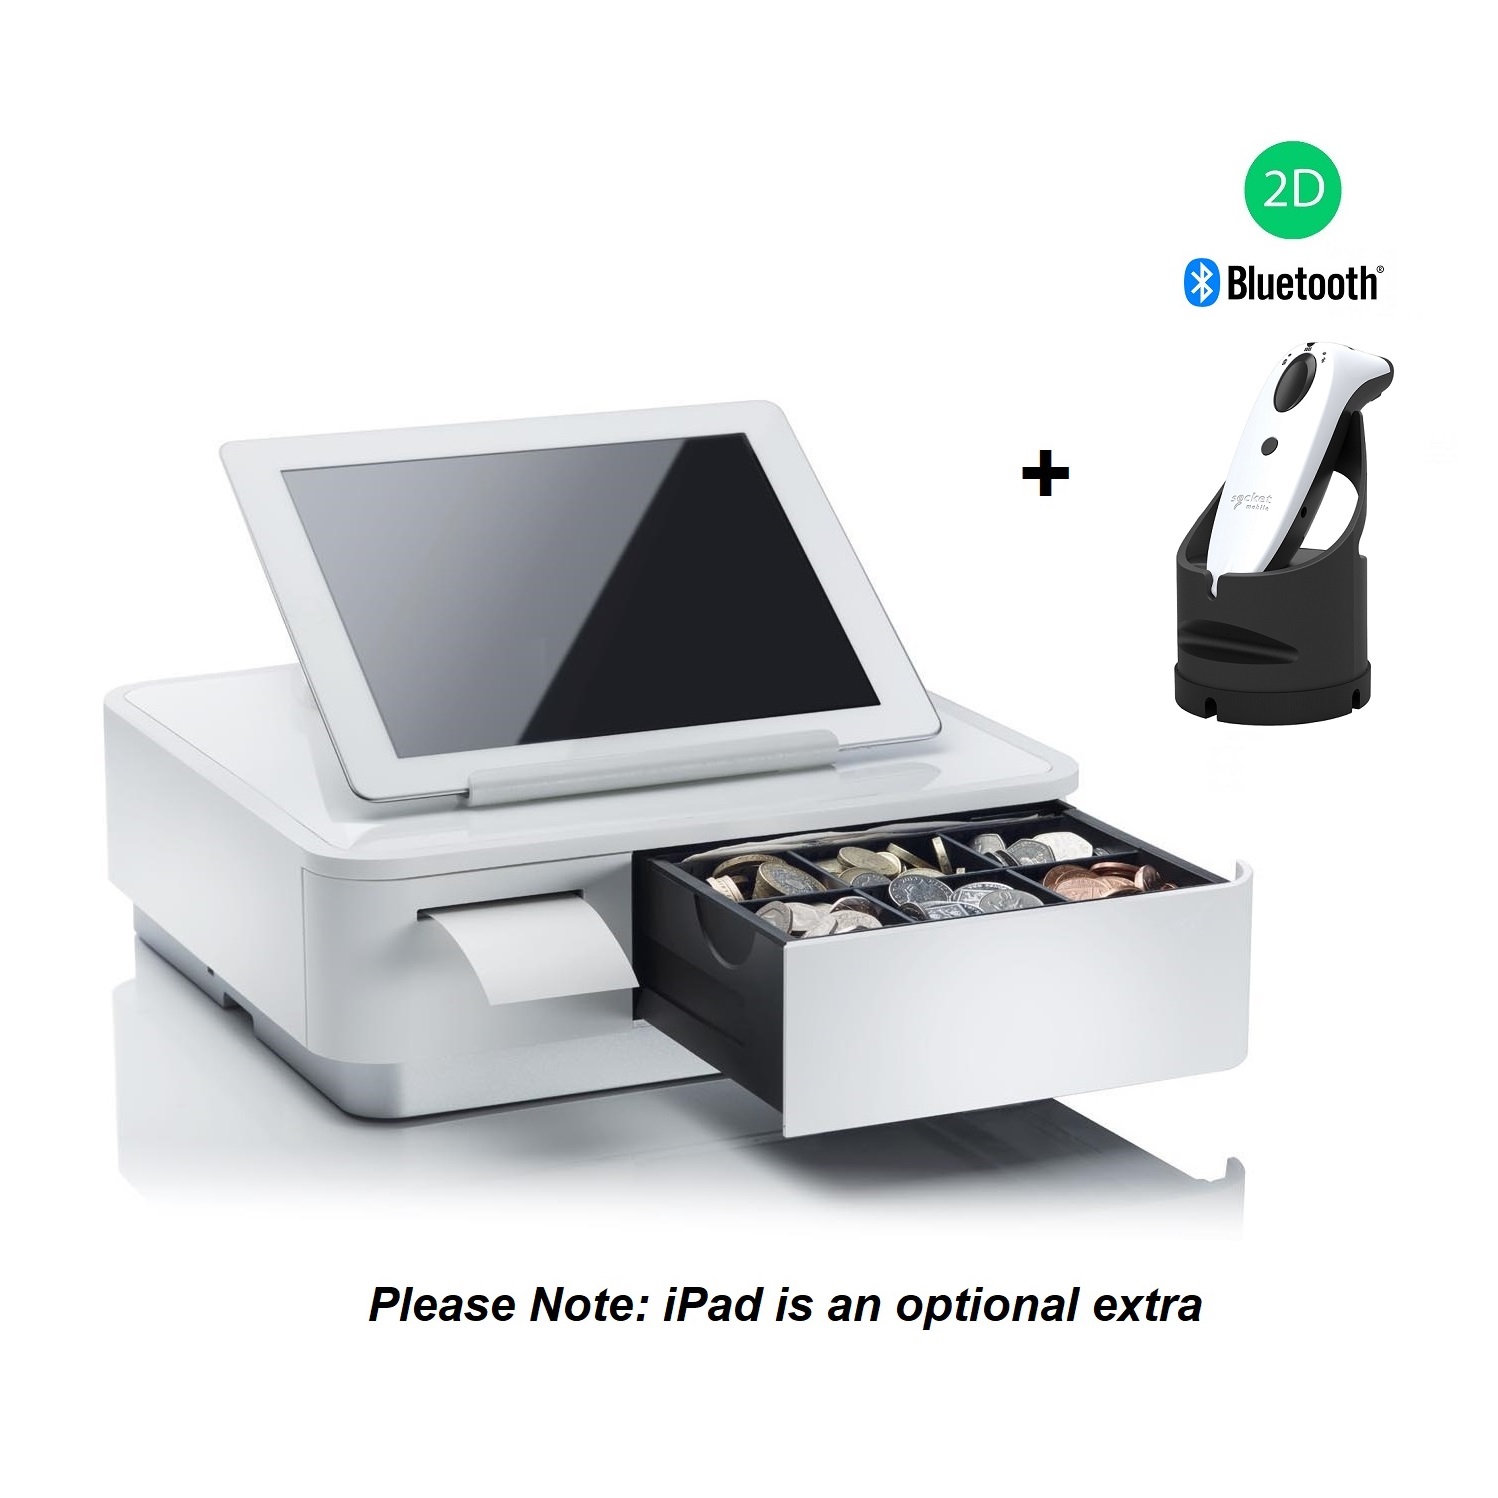 Star Micronics Mpop With Socket S740 2d Scanner With Dock White Mpop S740w Cash Register Warehouse